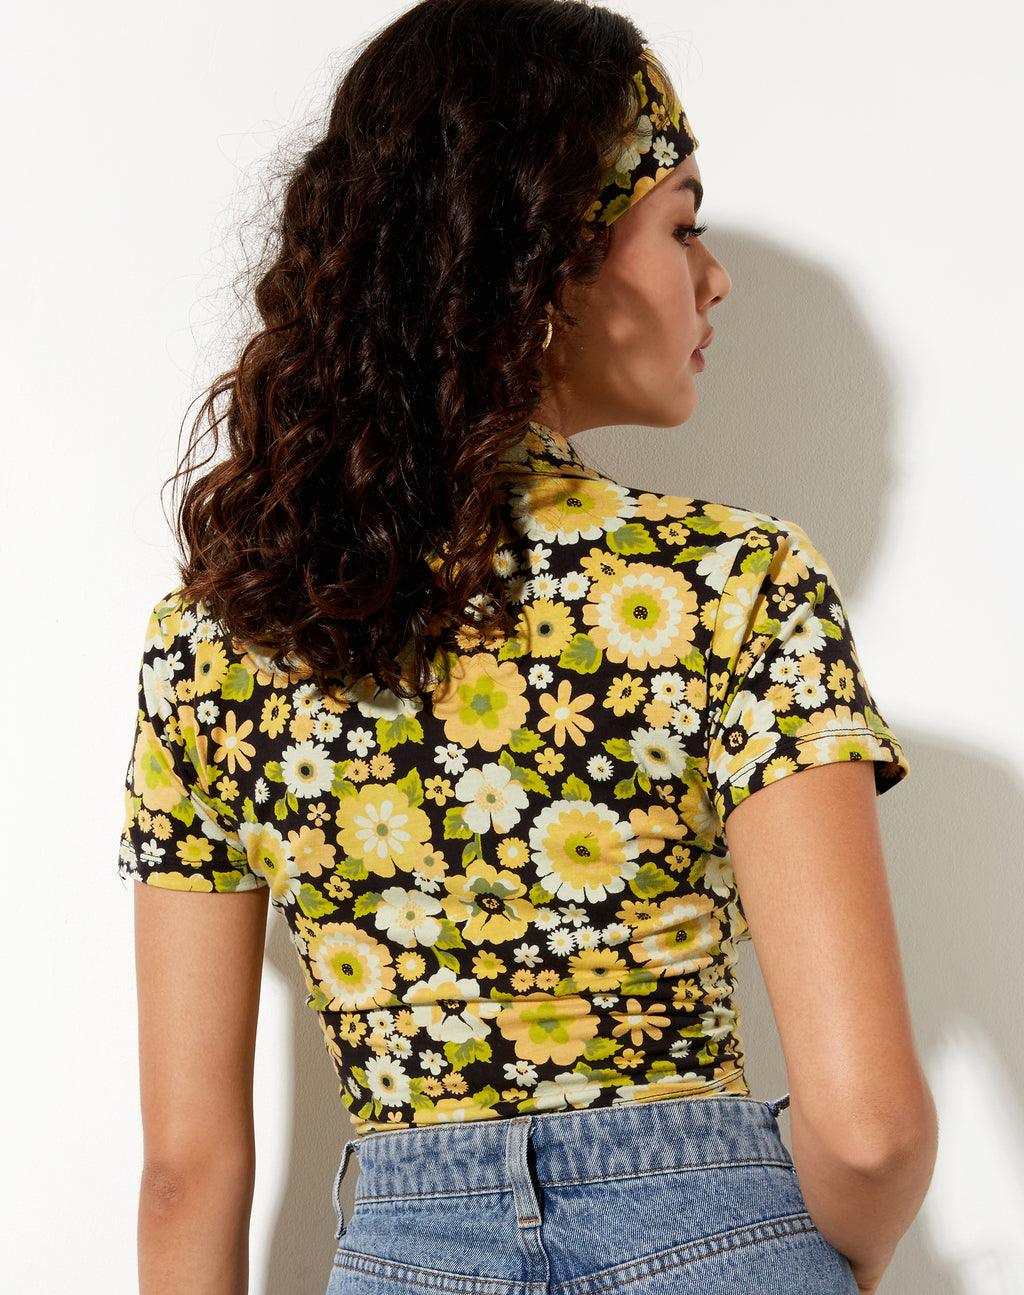 Wuma Cropped Shirt in Retro Floral